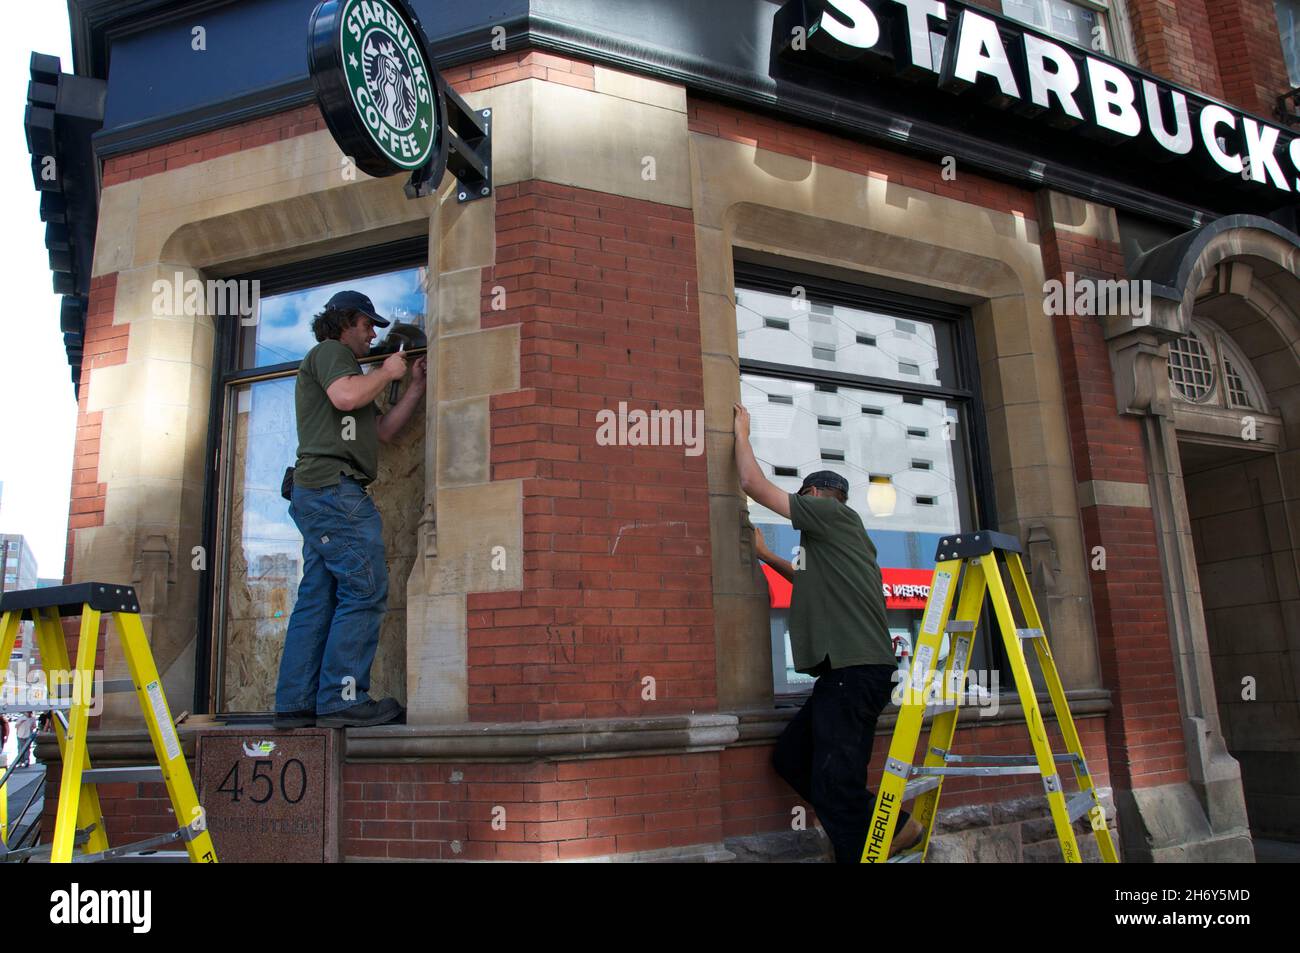 Toronto, Ontario, Canada - 06/25/2010: Window was smashed in coffee shop during G20 protests Stock Photo